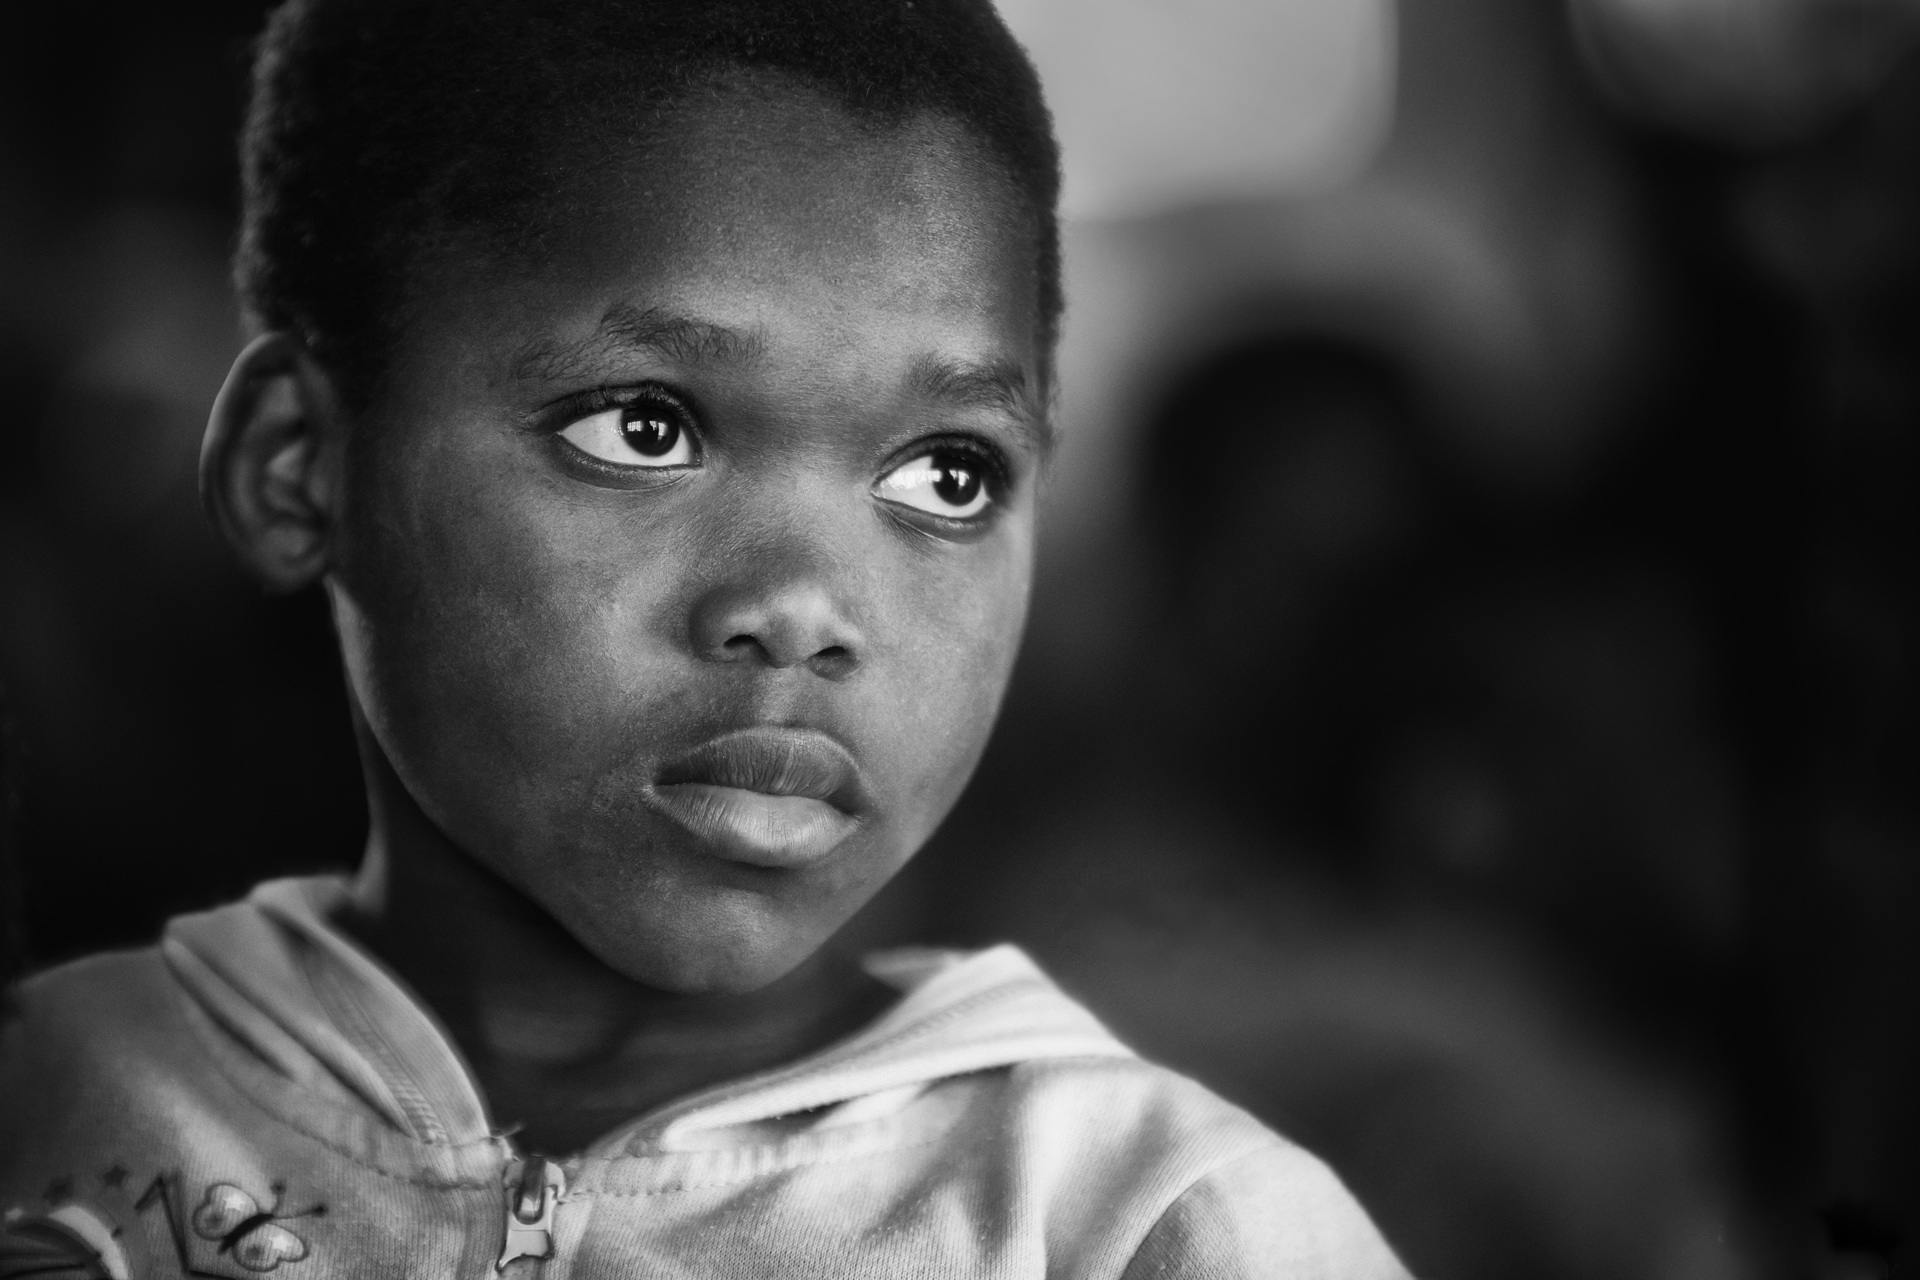 a black and white photo of a young boy, by Daniel Gelon, emmanuel shiru, gentle expression, she has a distant expression, screensaver